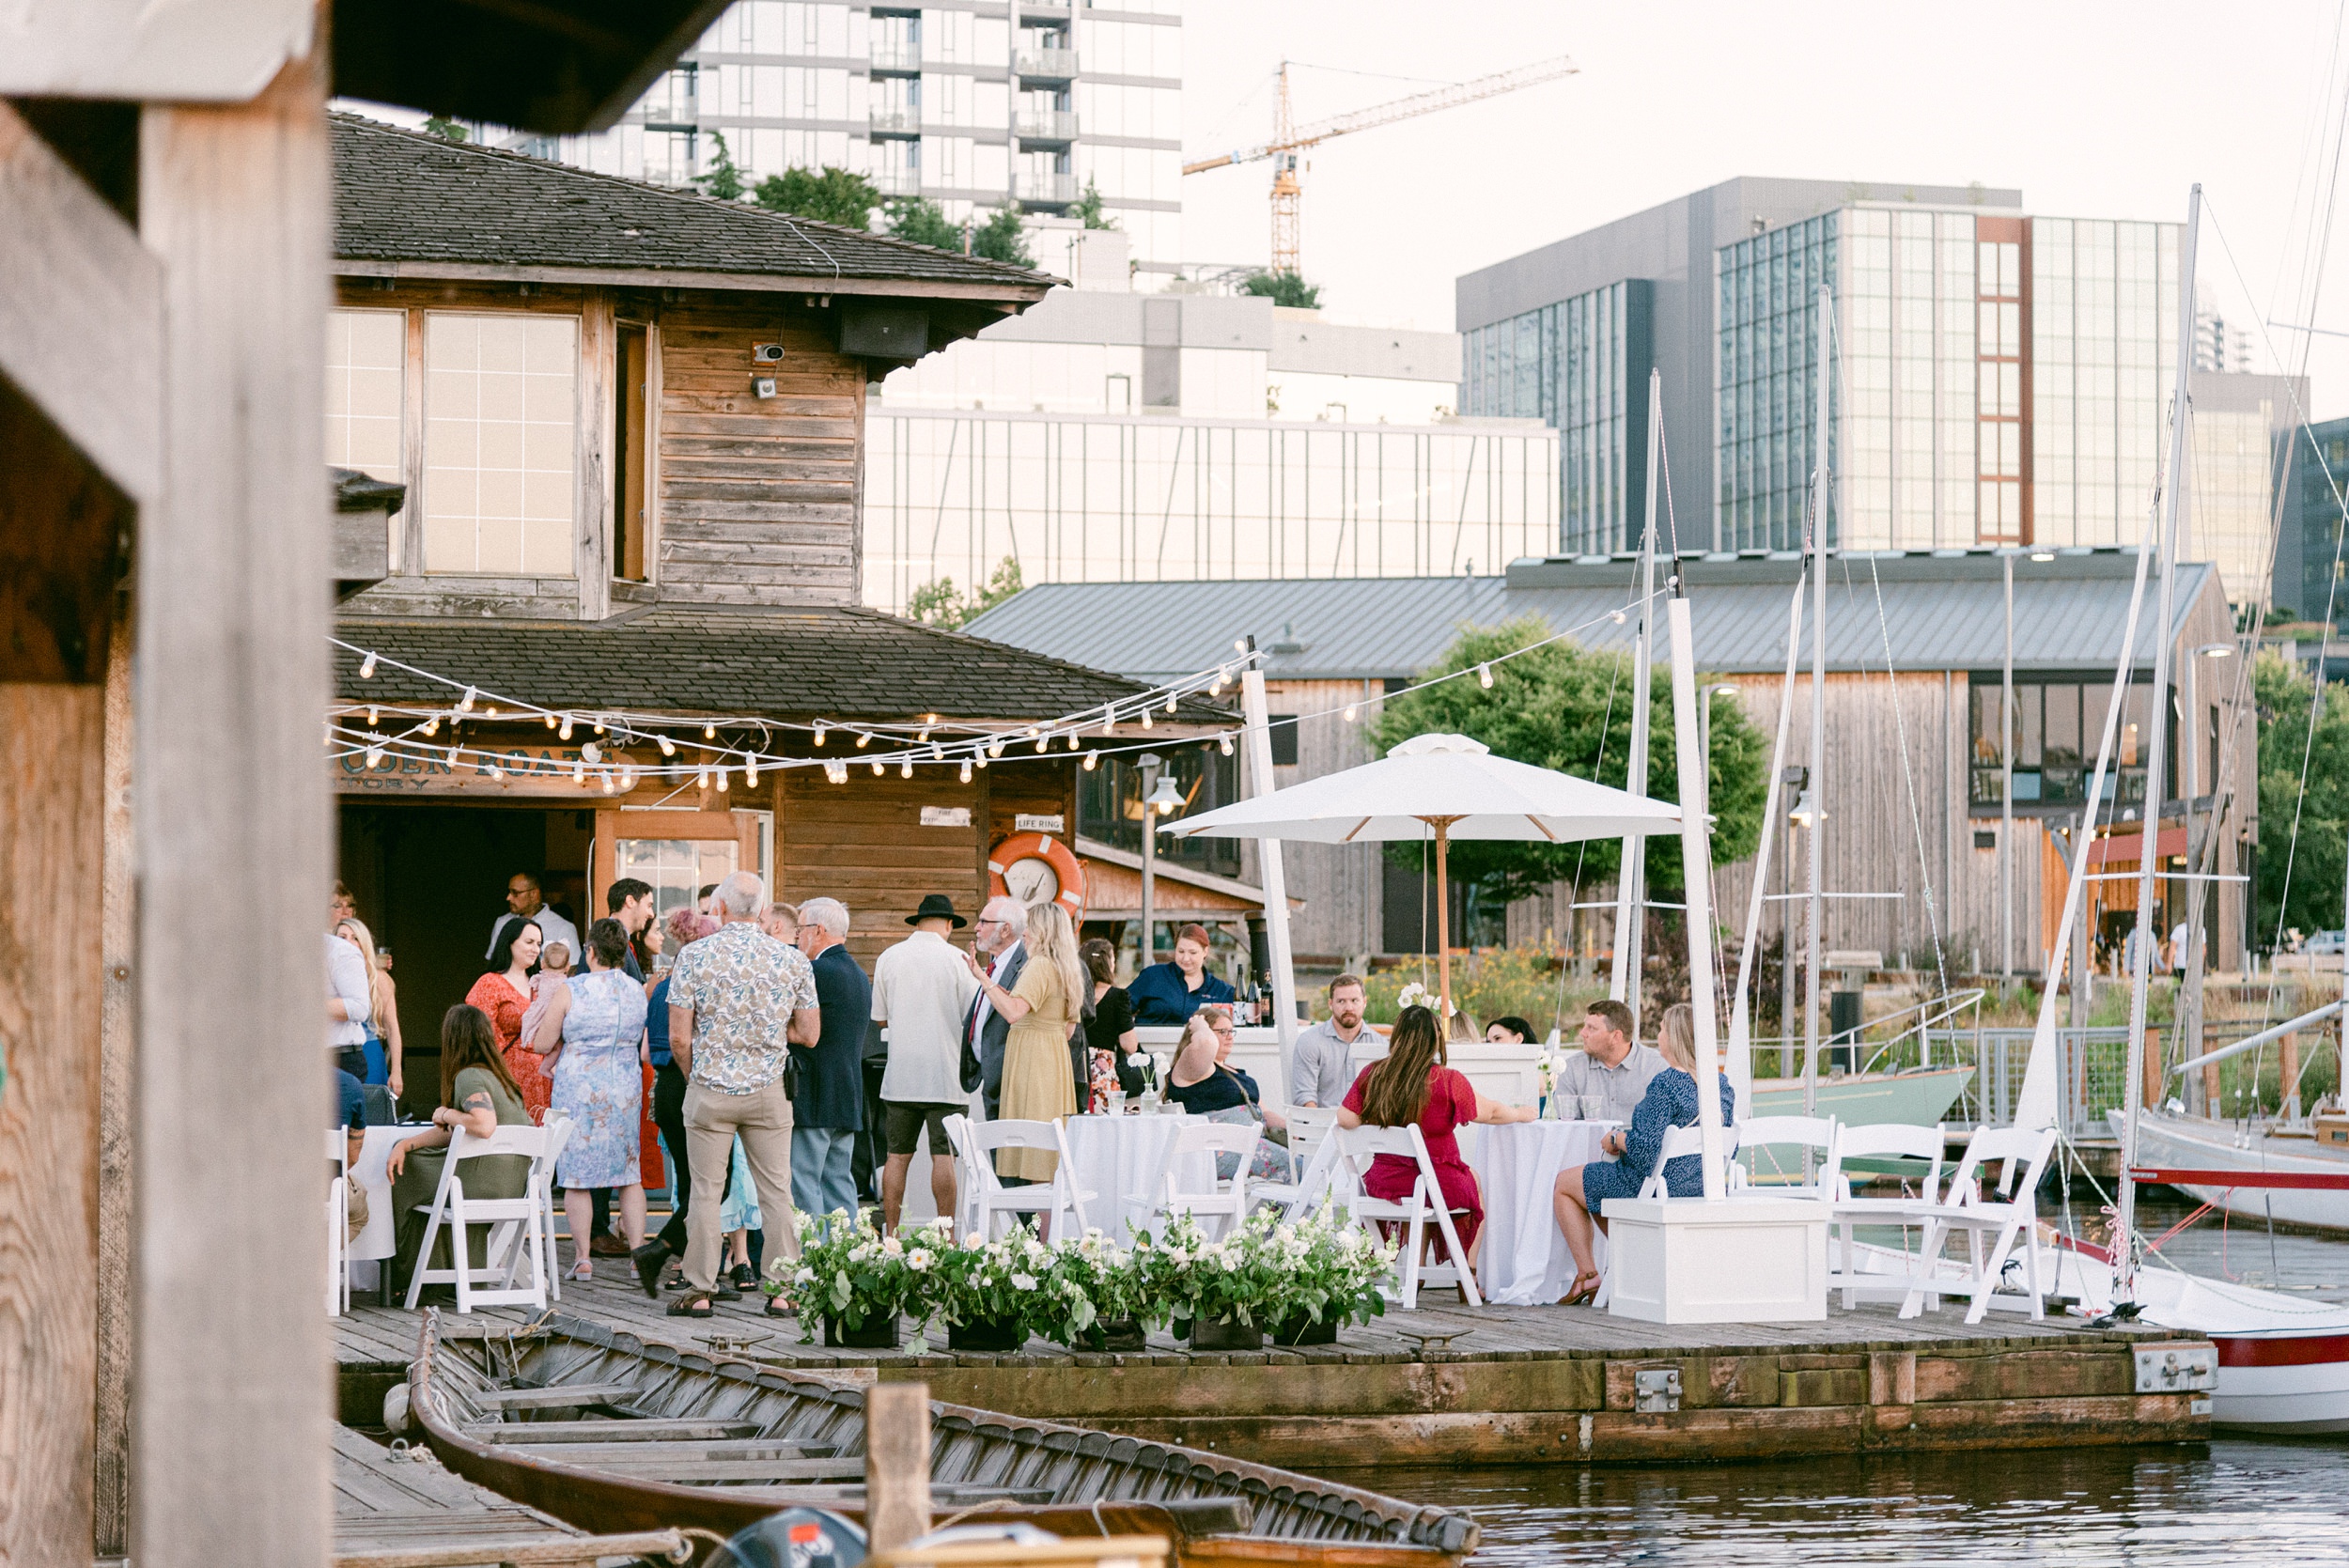 Fine Art Weddings in Seattle Washington. The Center for Wooden Boats, the photo is from the dock facing the venue and the guests having fun. The cityscape is in the background.